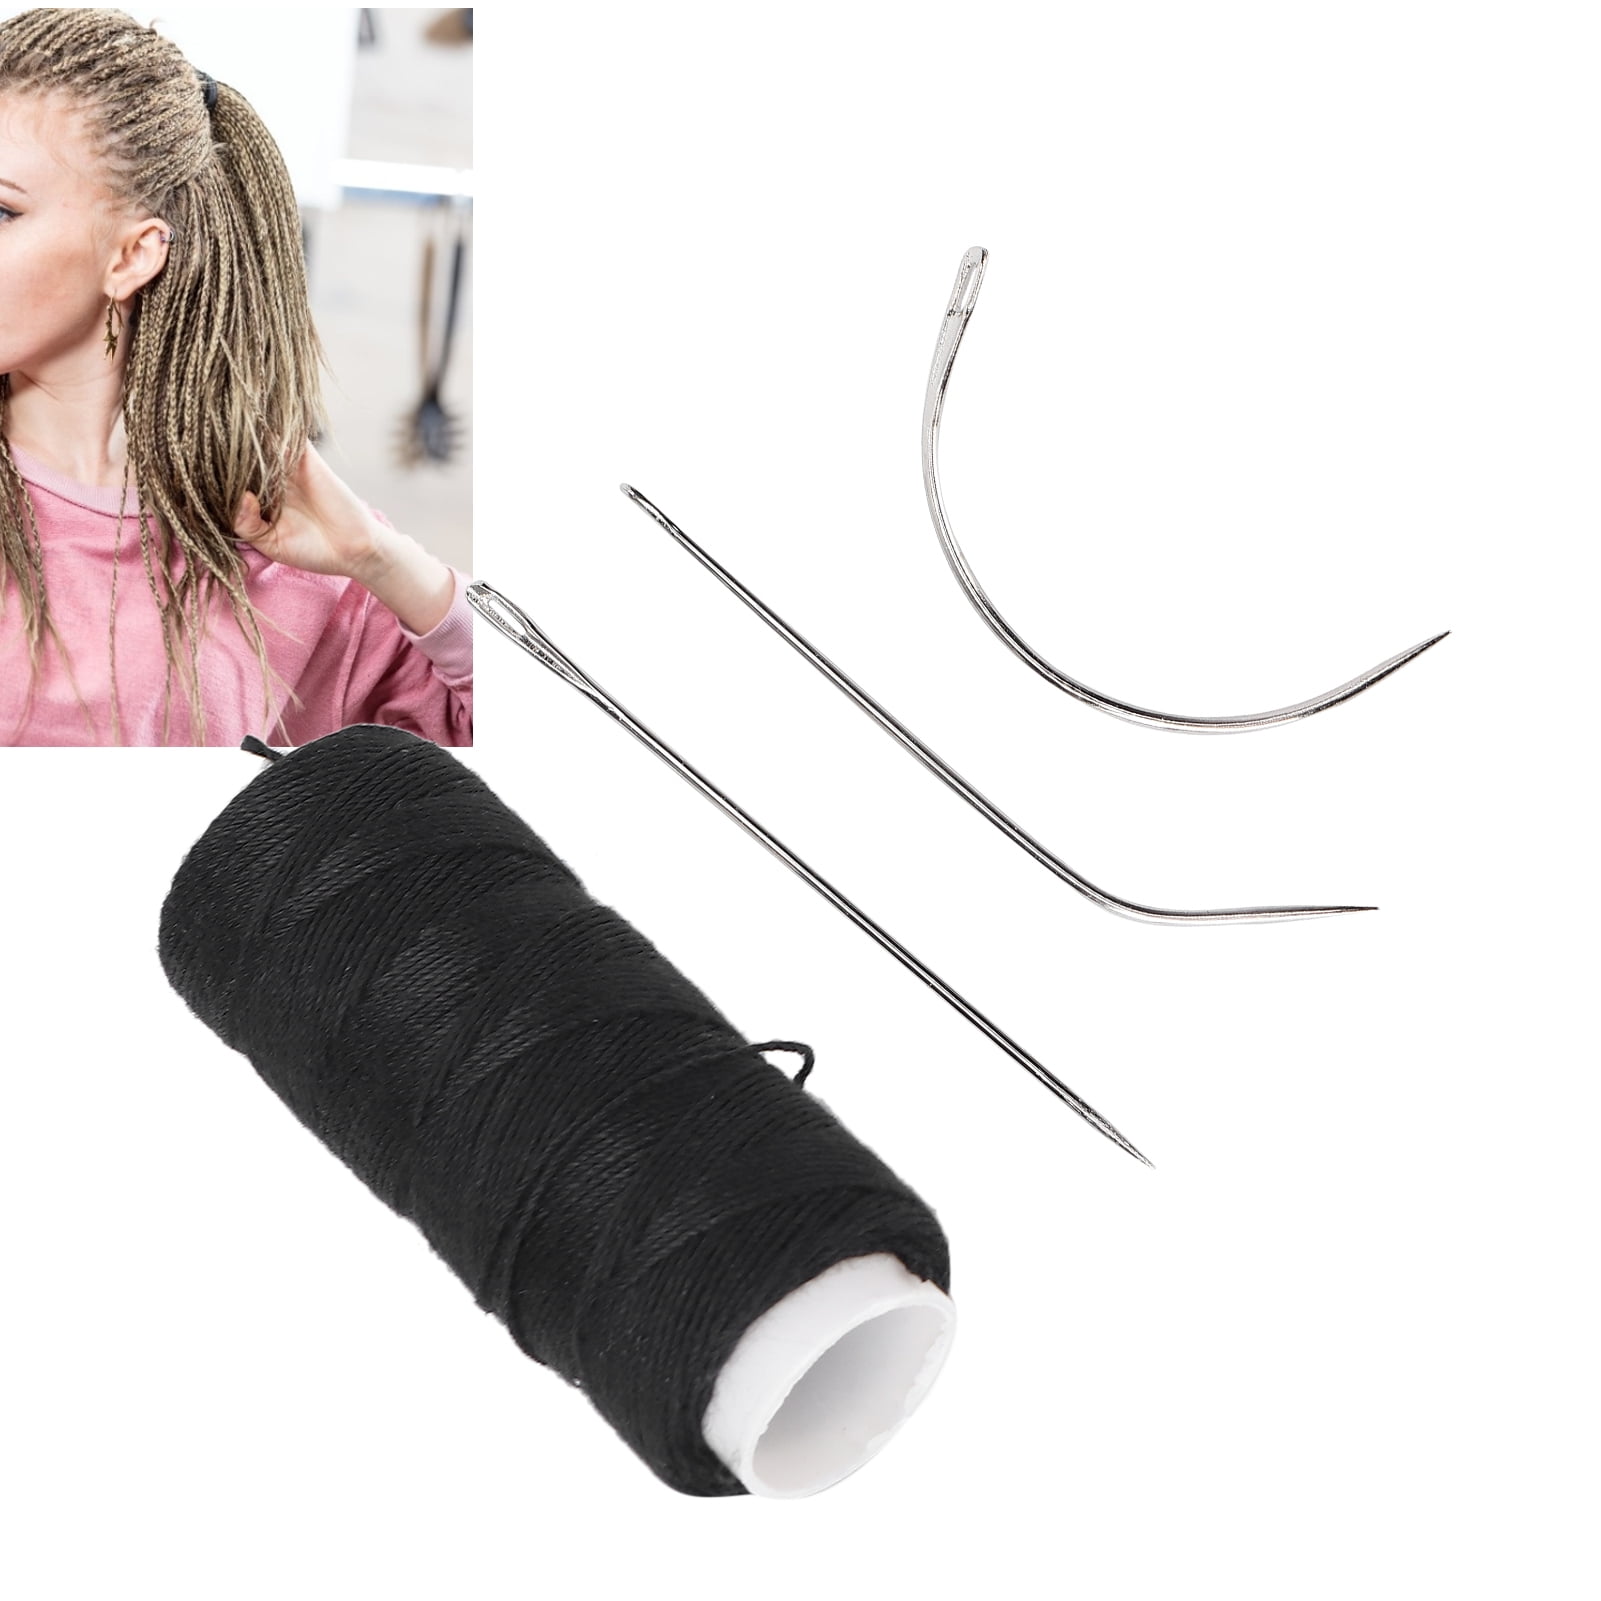 Superb hair weave needle and thread For Hair Styling 